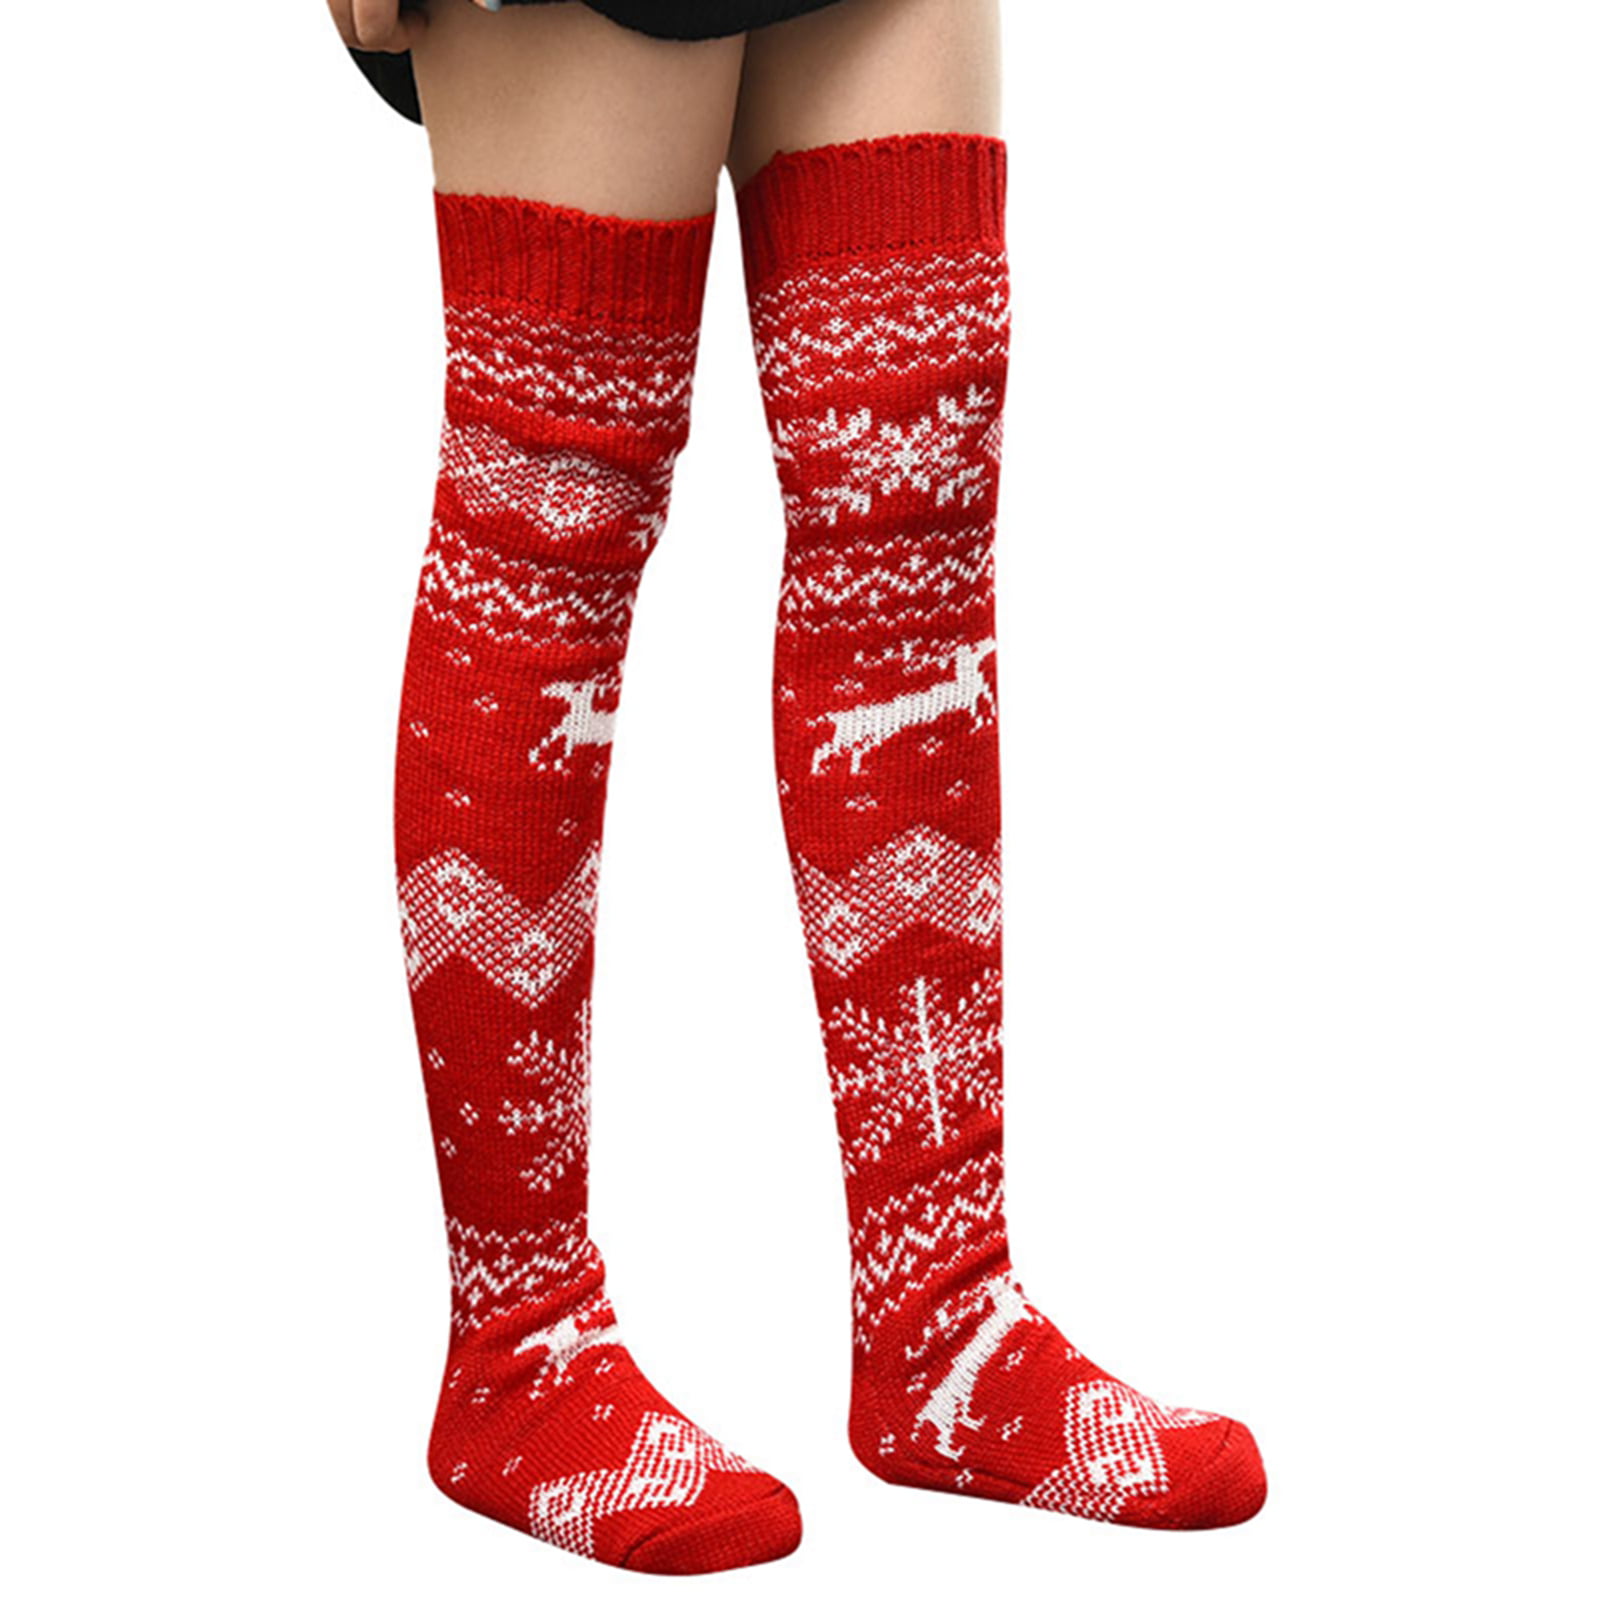 Thigh Stockings Soft Breathable Over Knee High Women Long Knit Socks Cartoon 